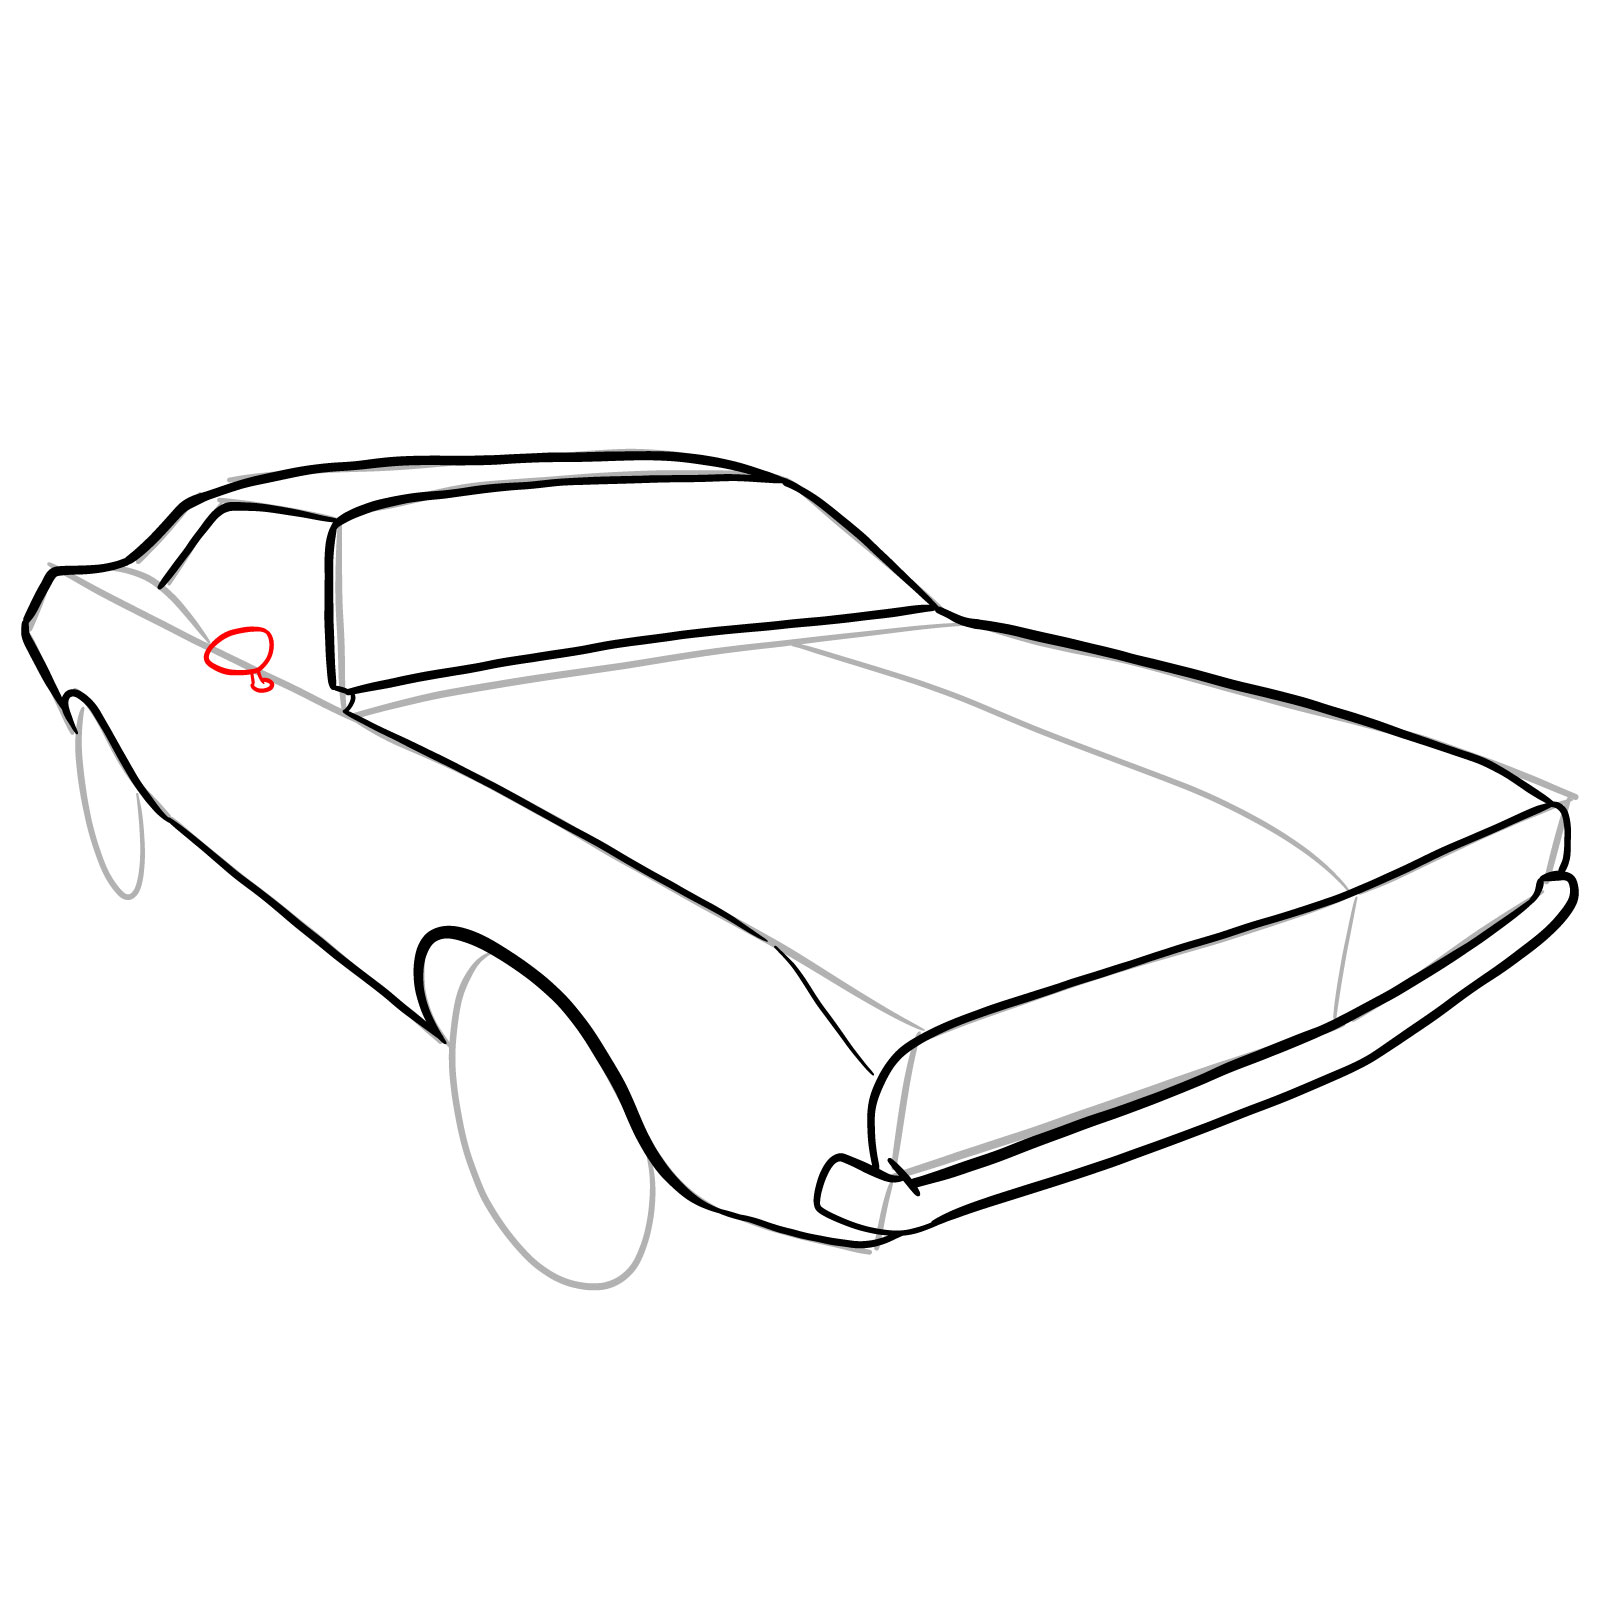 How to draw Dodge Challenger 1970 - step 15